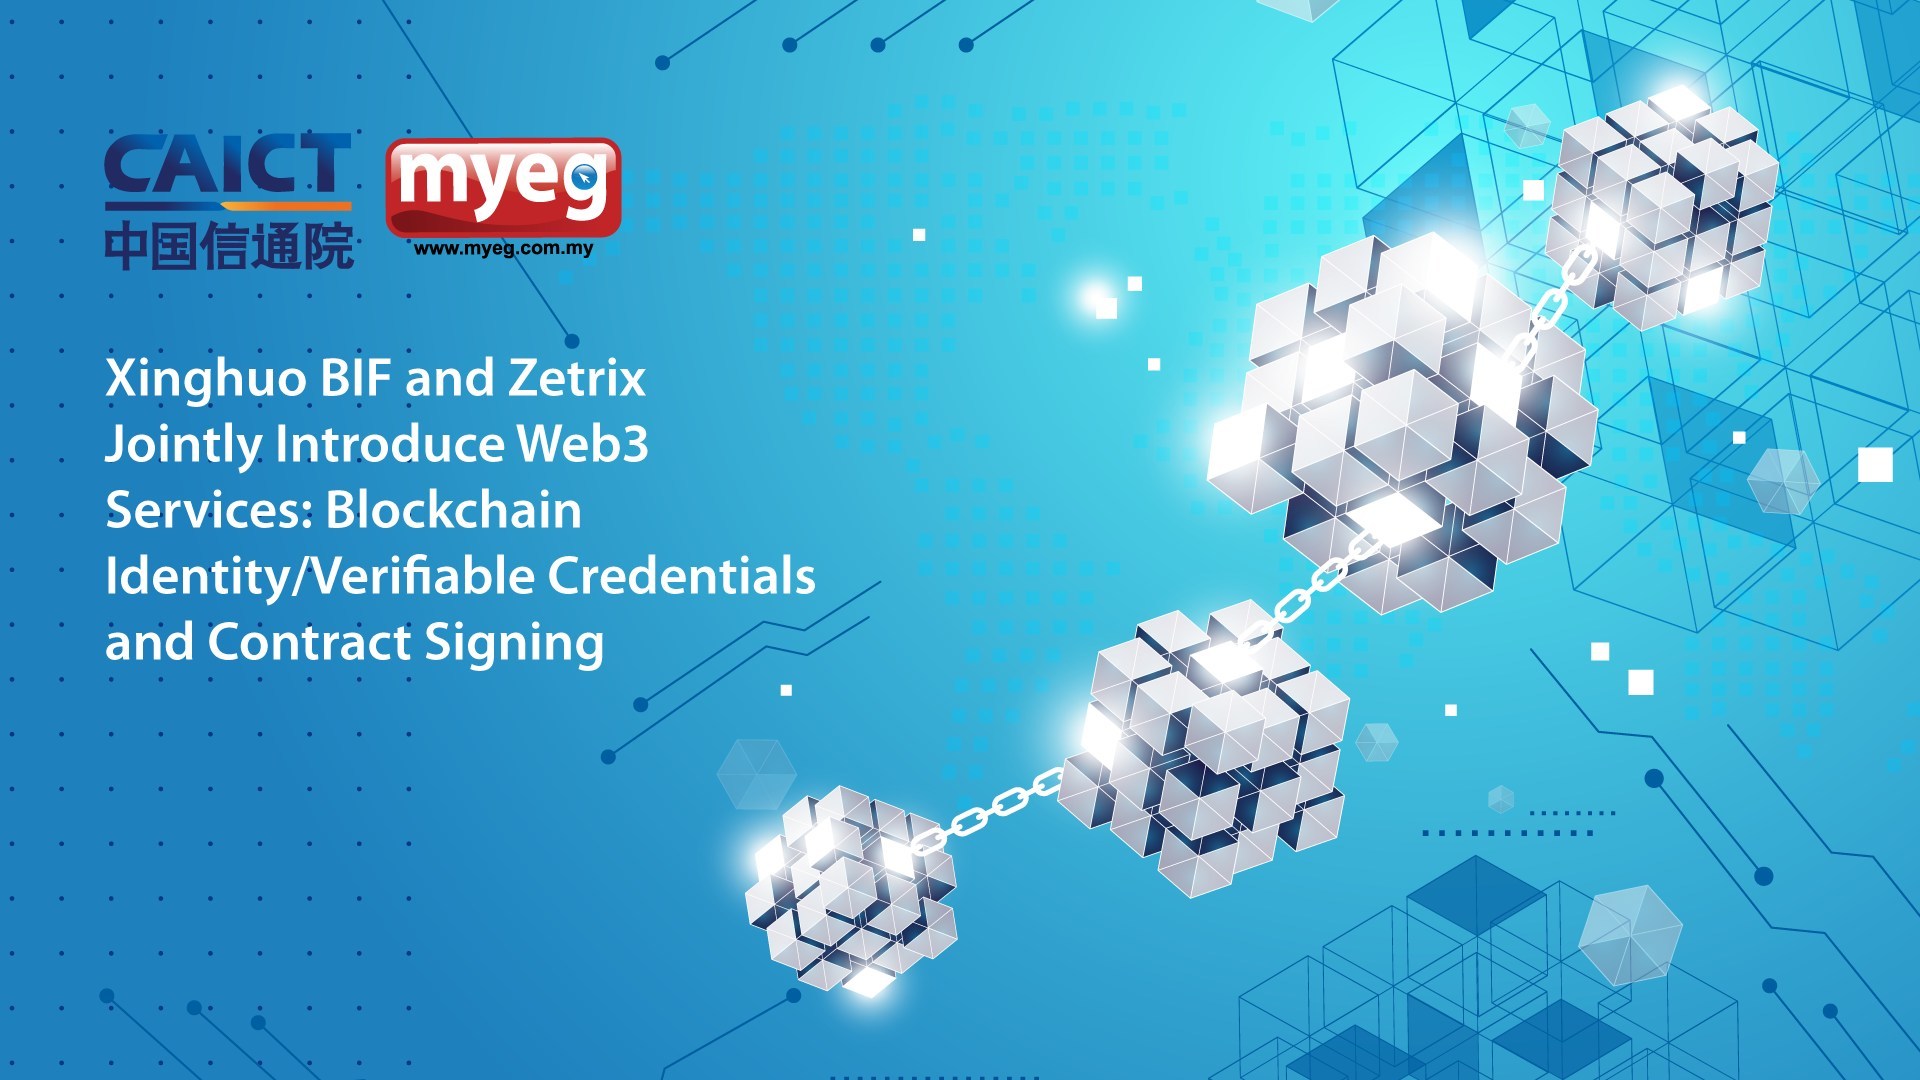 Xinghuo BIF and Zetrix Jointly Introduce Web3 Services: Blockchain Identity/Verifiable Credentials and Contract Signing